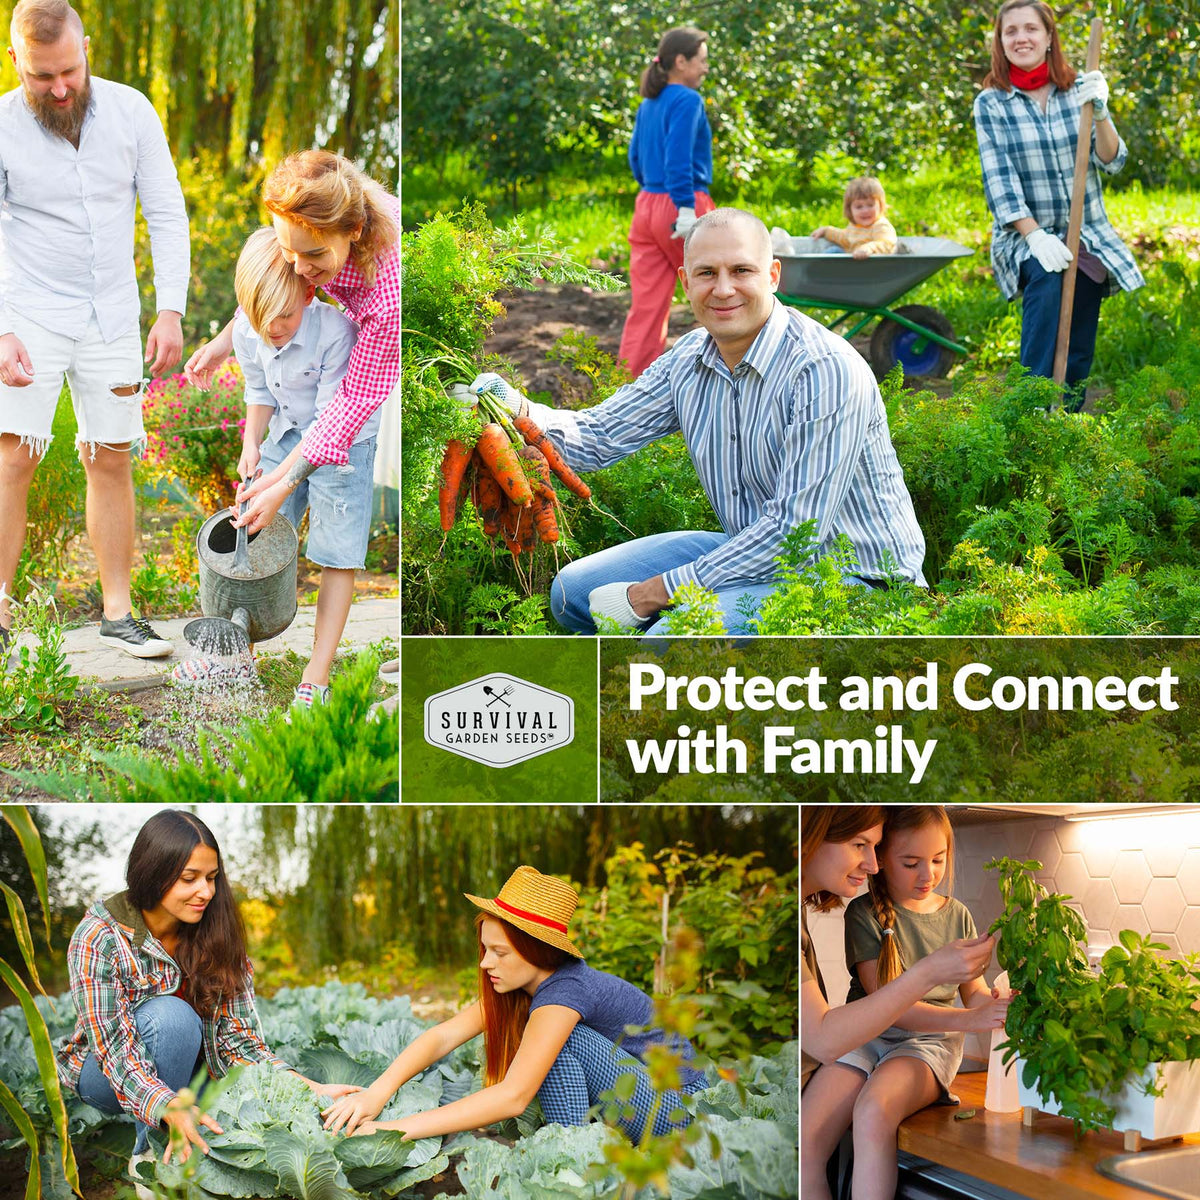 Protect and connect with family